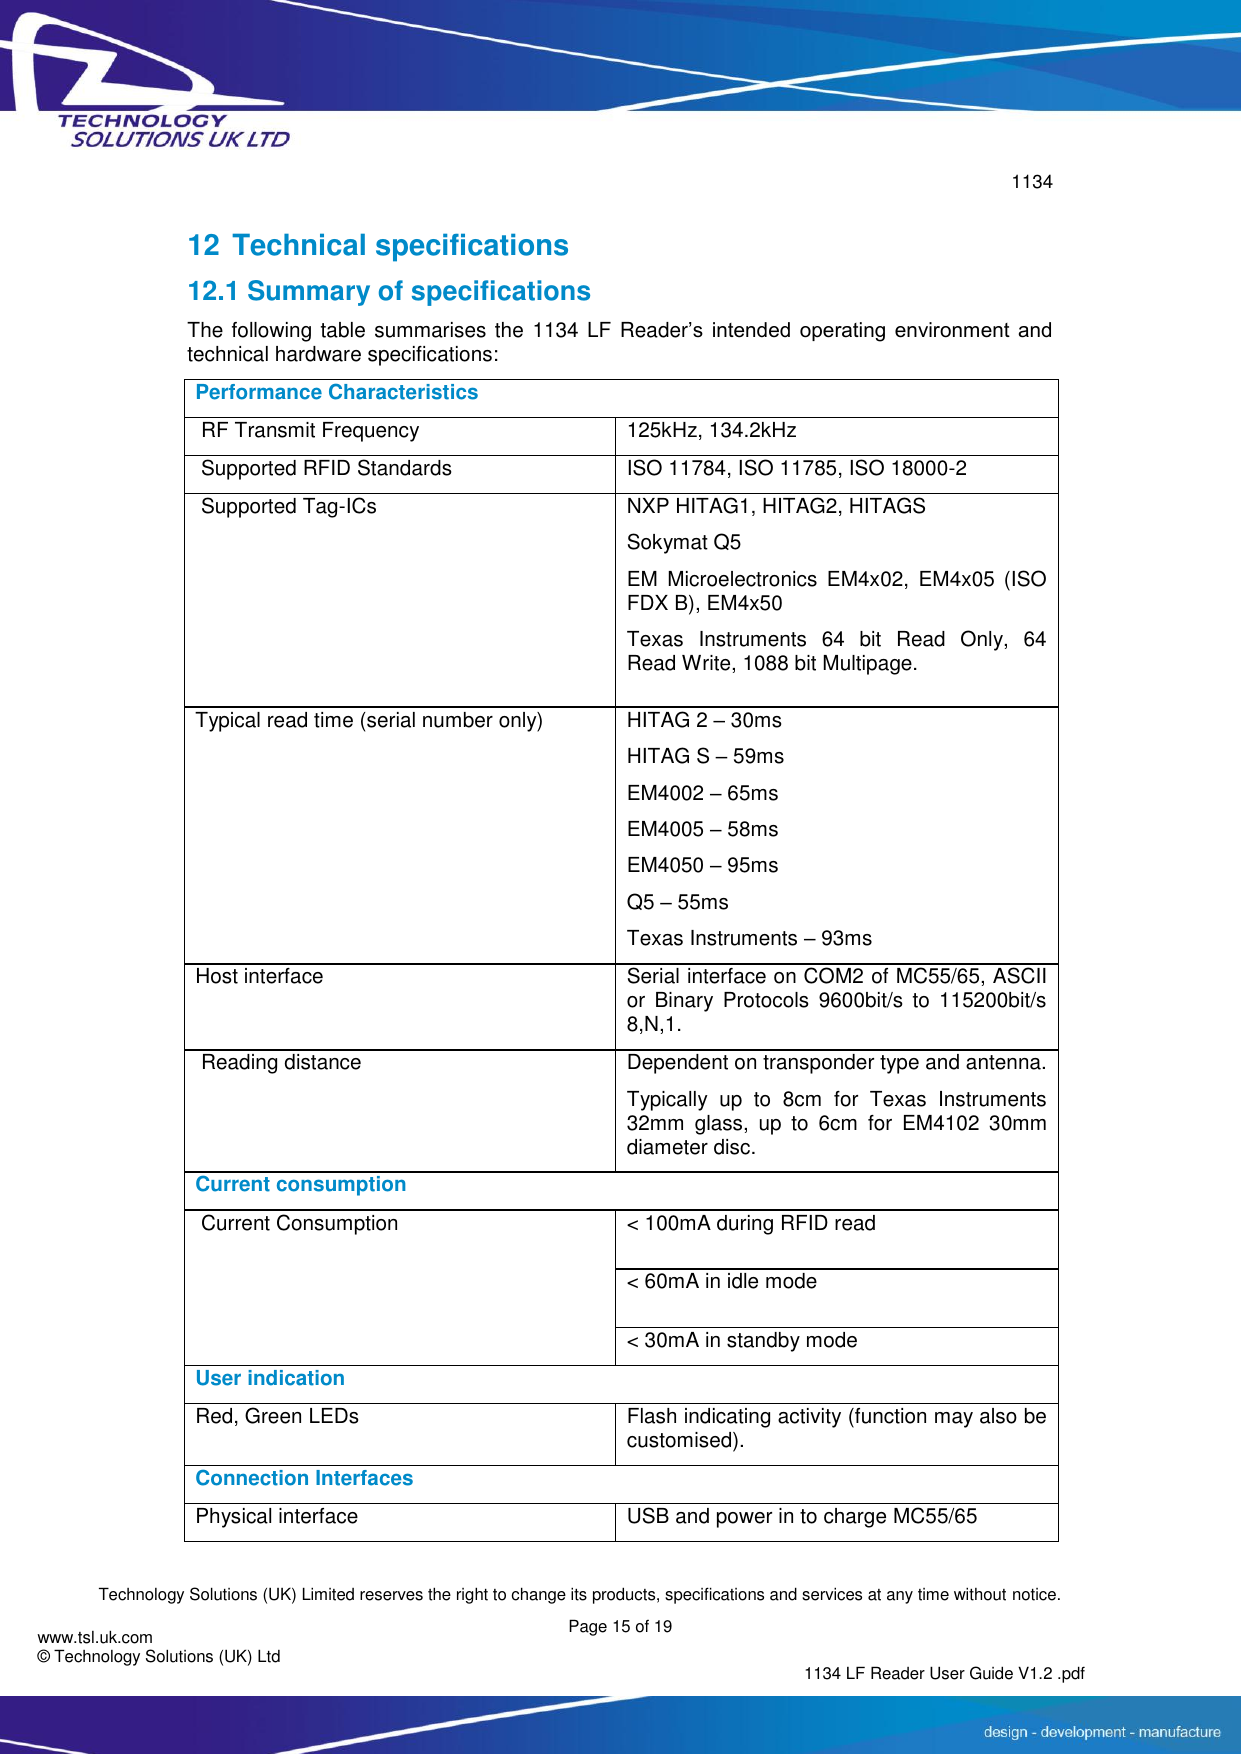        1134  Technology Solutions (UK) Limited reserves the right to change its products, specifications and services at any time without notice.   Page 15 of 19 1134 LF Reader User Guide V1.2 .pdf www.tsl.uk.com © Technology Solutions (UK) Ltd  12 Technical specifications 12.1 Summary of specifications The following table summarises the 1134 LF Reader’s  intended  operating  environment  and technical hardware specifications: Performance Characteristics  RF Transmit Frequency   125kHz, 134.2kHz  Supported RFID Standards   ISO 11784, ISO 11785, ISO 18000-2  Supported Tag-ICs         NXP HITAG1, HITAG2, HITAGS Sokymat Q5 EM  Microelectronics  EM4x02,  EM4x05  (ISO FDX B), EM4x50 Texas  Instruments  64  bit  Read  Only,  64 Read Write, 1088 bit Multipage. Typical read time (serial number only) HITAG 2 – 30ms HITAG S – 59ms EM4002 – 65ms EM4005 – 58ms EM4050 – 95ms Q5 – 55ms Texas Instruments – 93ms Host interface Serial interface on COM2 of MC55/65, ASCII or  Binary  Protocols  9600bit/s  to  115200bit/s 8,N,1.  Reading distance   Dependent on transponder type and antenna. Typically  up  to  8cm  for  Texas  Instruments 32mm  glass,  up  to  6cm  for  EM4102  30mm diameter disc. Current consumption  Current Consumption     &lt; 100mA during RFID read &lt; 60mA in idle mode &lt; 30mA in standby mode User indication Red, Green LEDs Flash indicating activity (function may also be customised). Connection Interfaces Physical interface USB and power in to charge MC55/65 